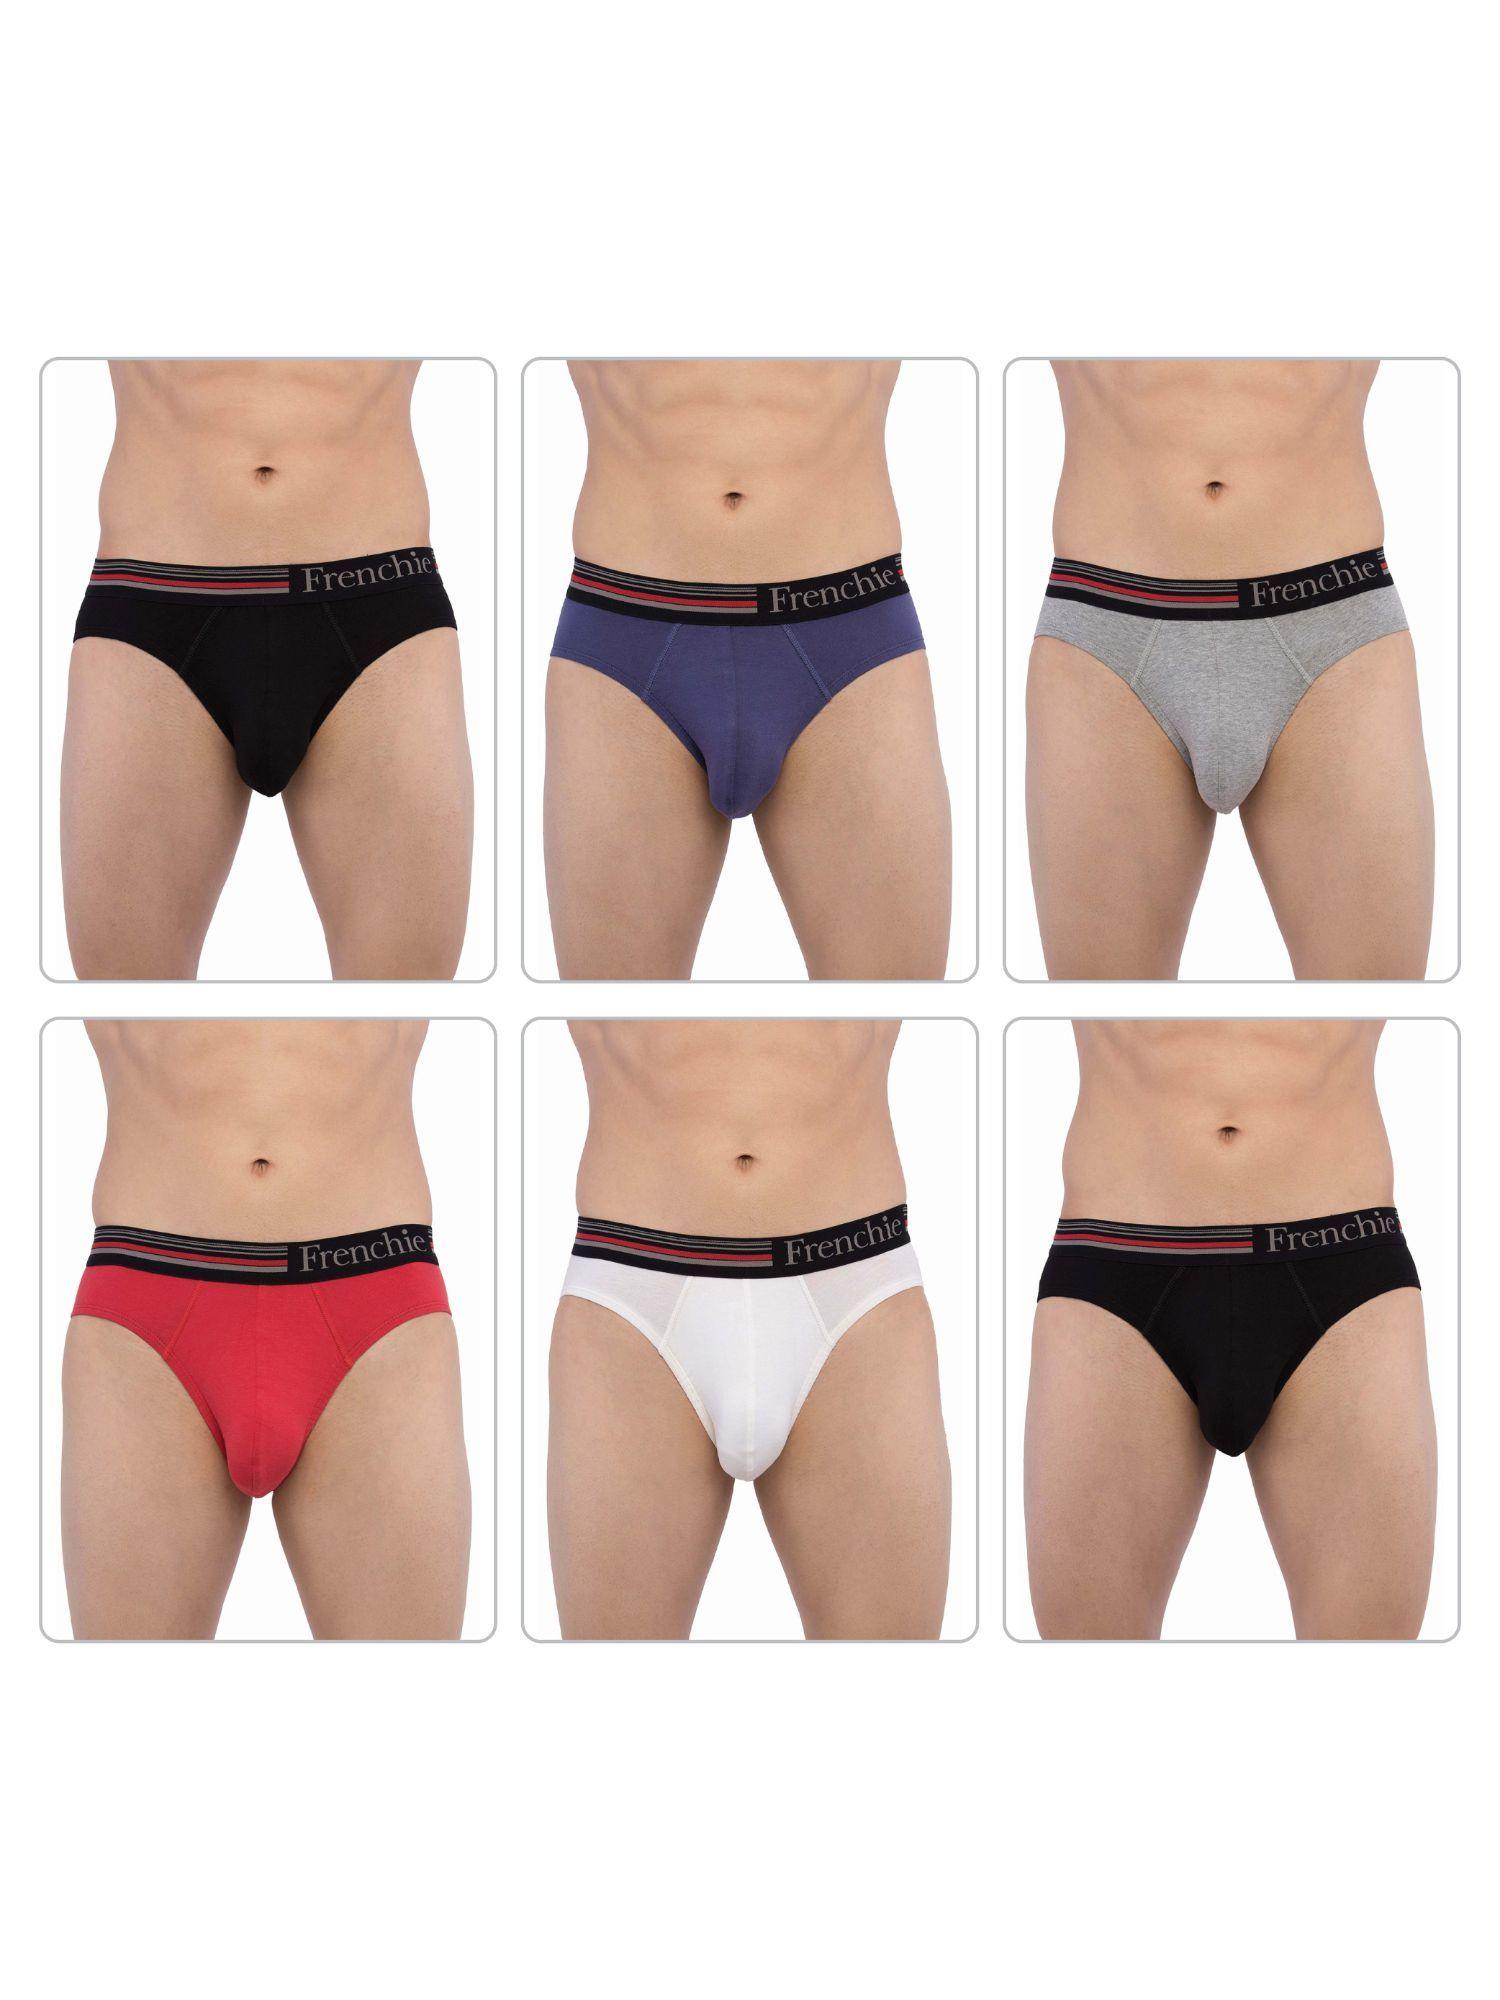 casuals 4000 mens cotton briefs assorted colours (pack of 6)